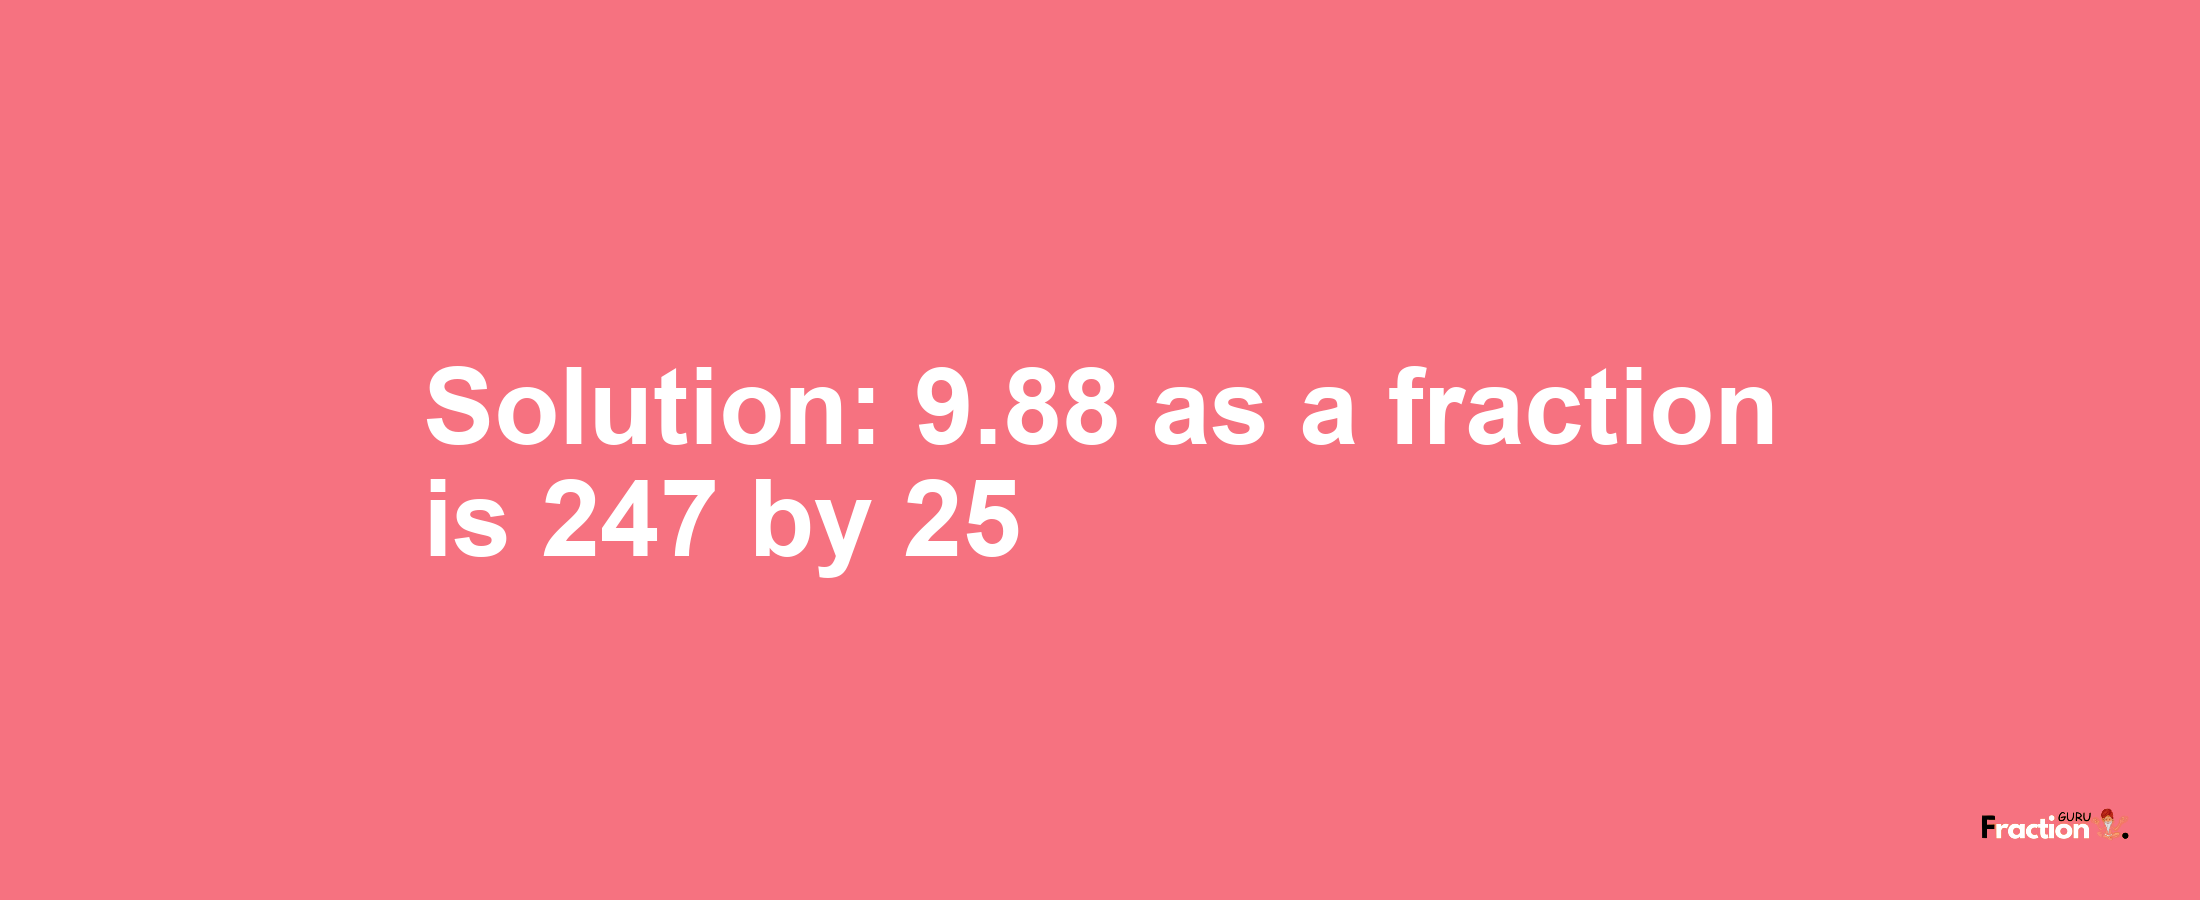 Solution:9.88 as a fraction is 247/25